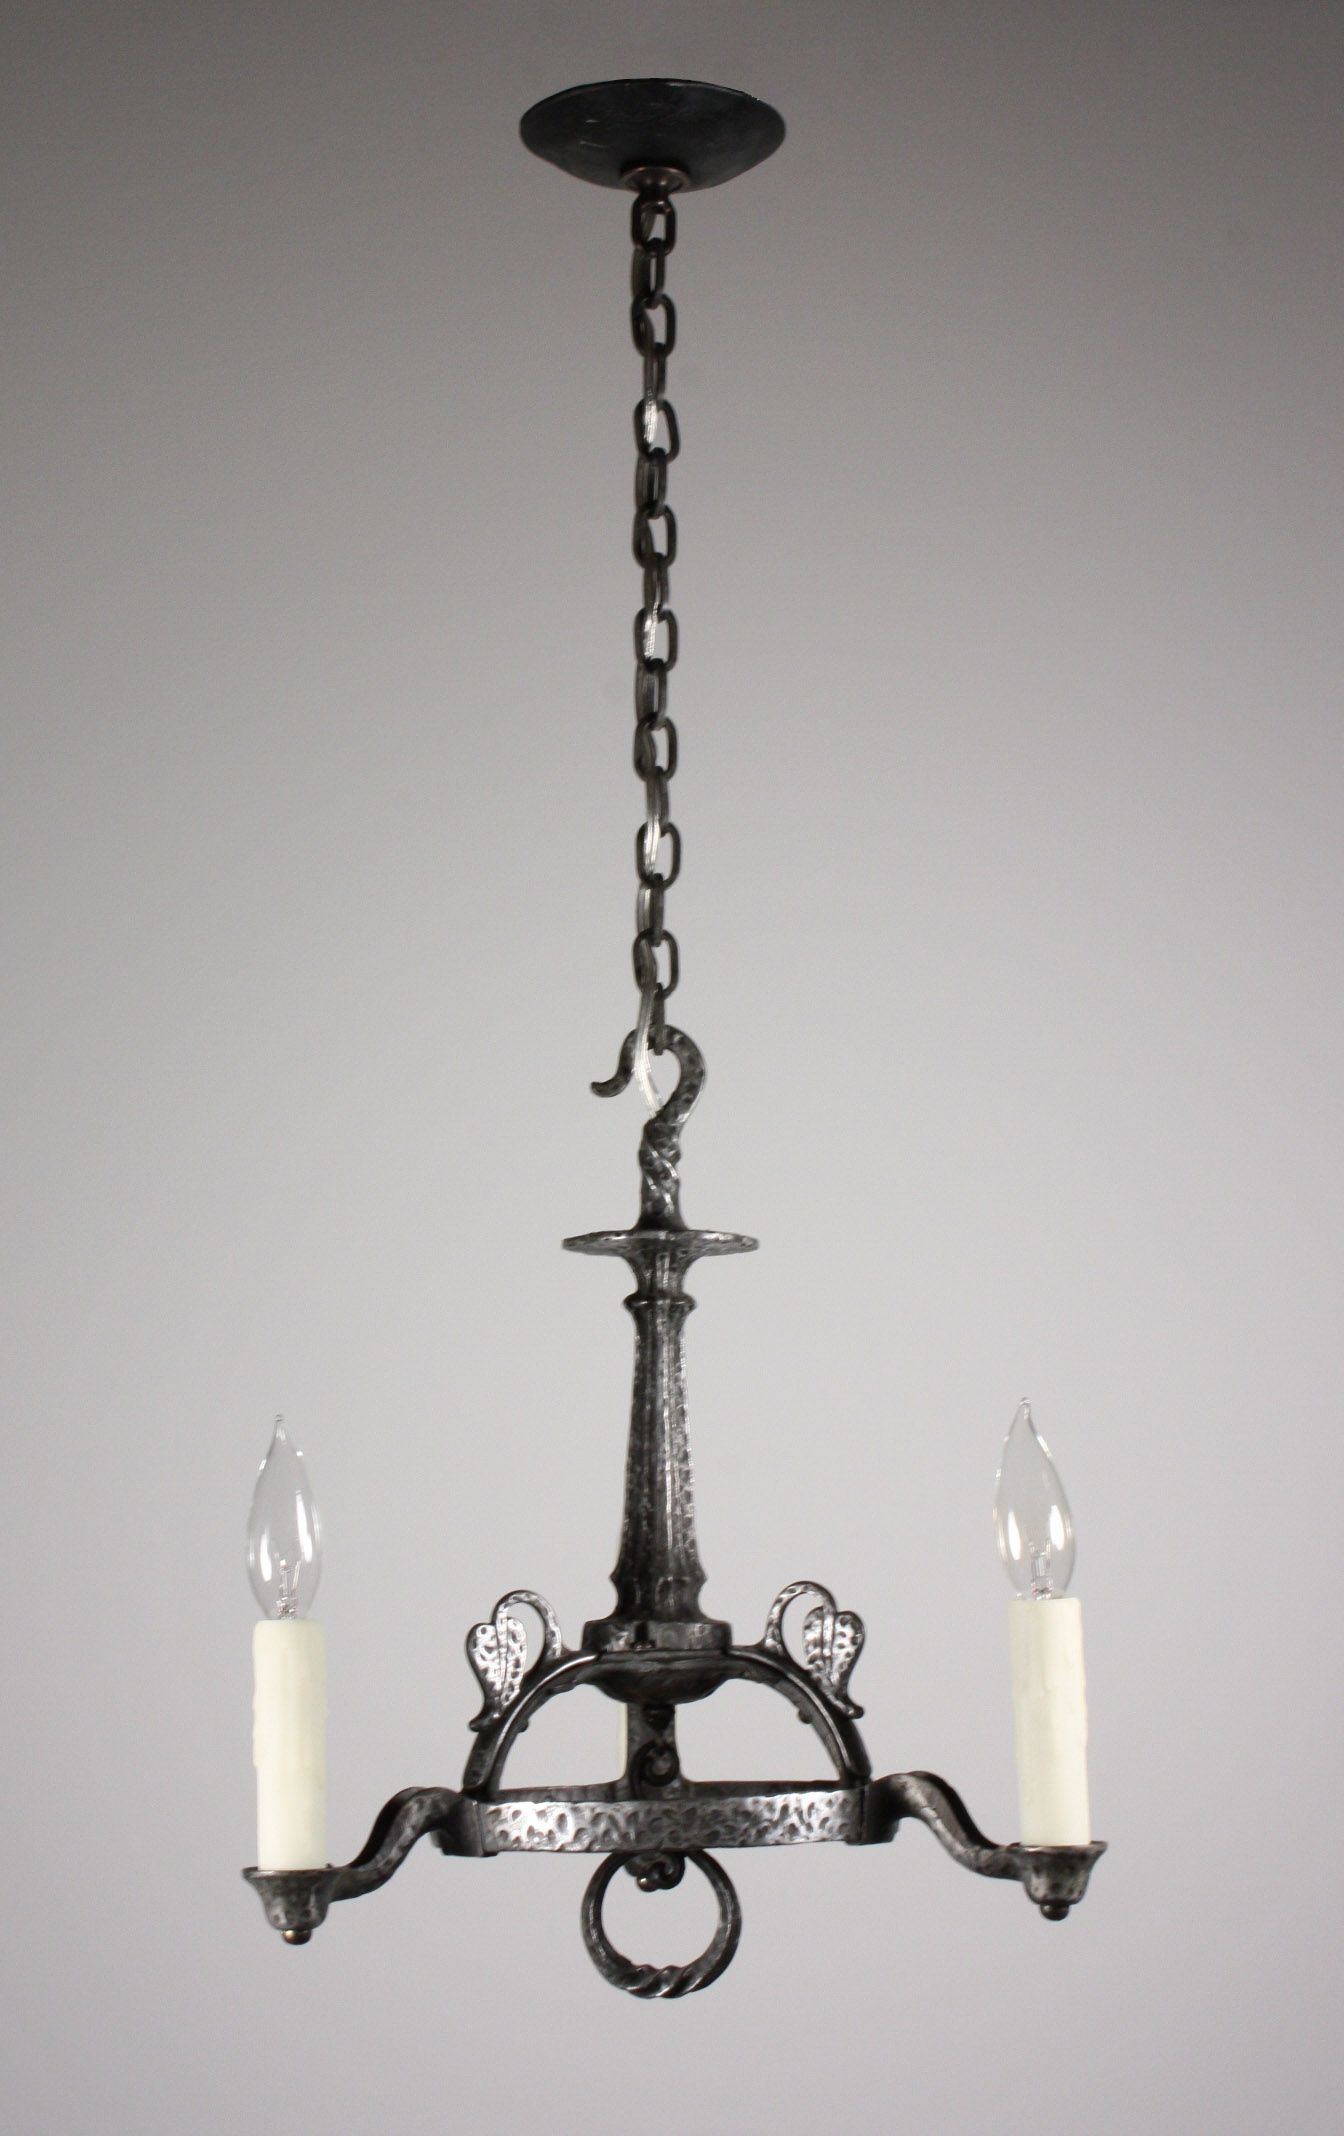 Two Matching Antique Spanish Revival Three Light Chandeliers Cast With Regard To Cast Iron Antique Chandelier (View 14 of 15)